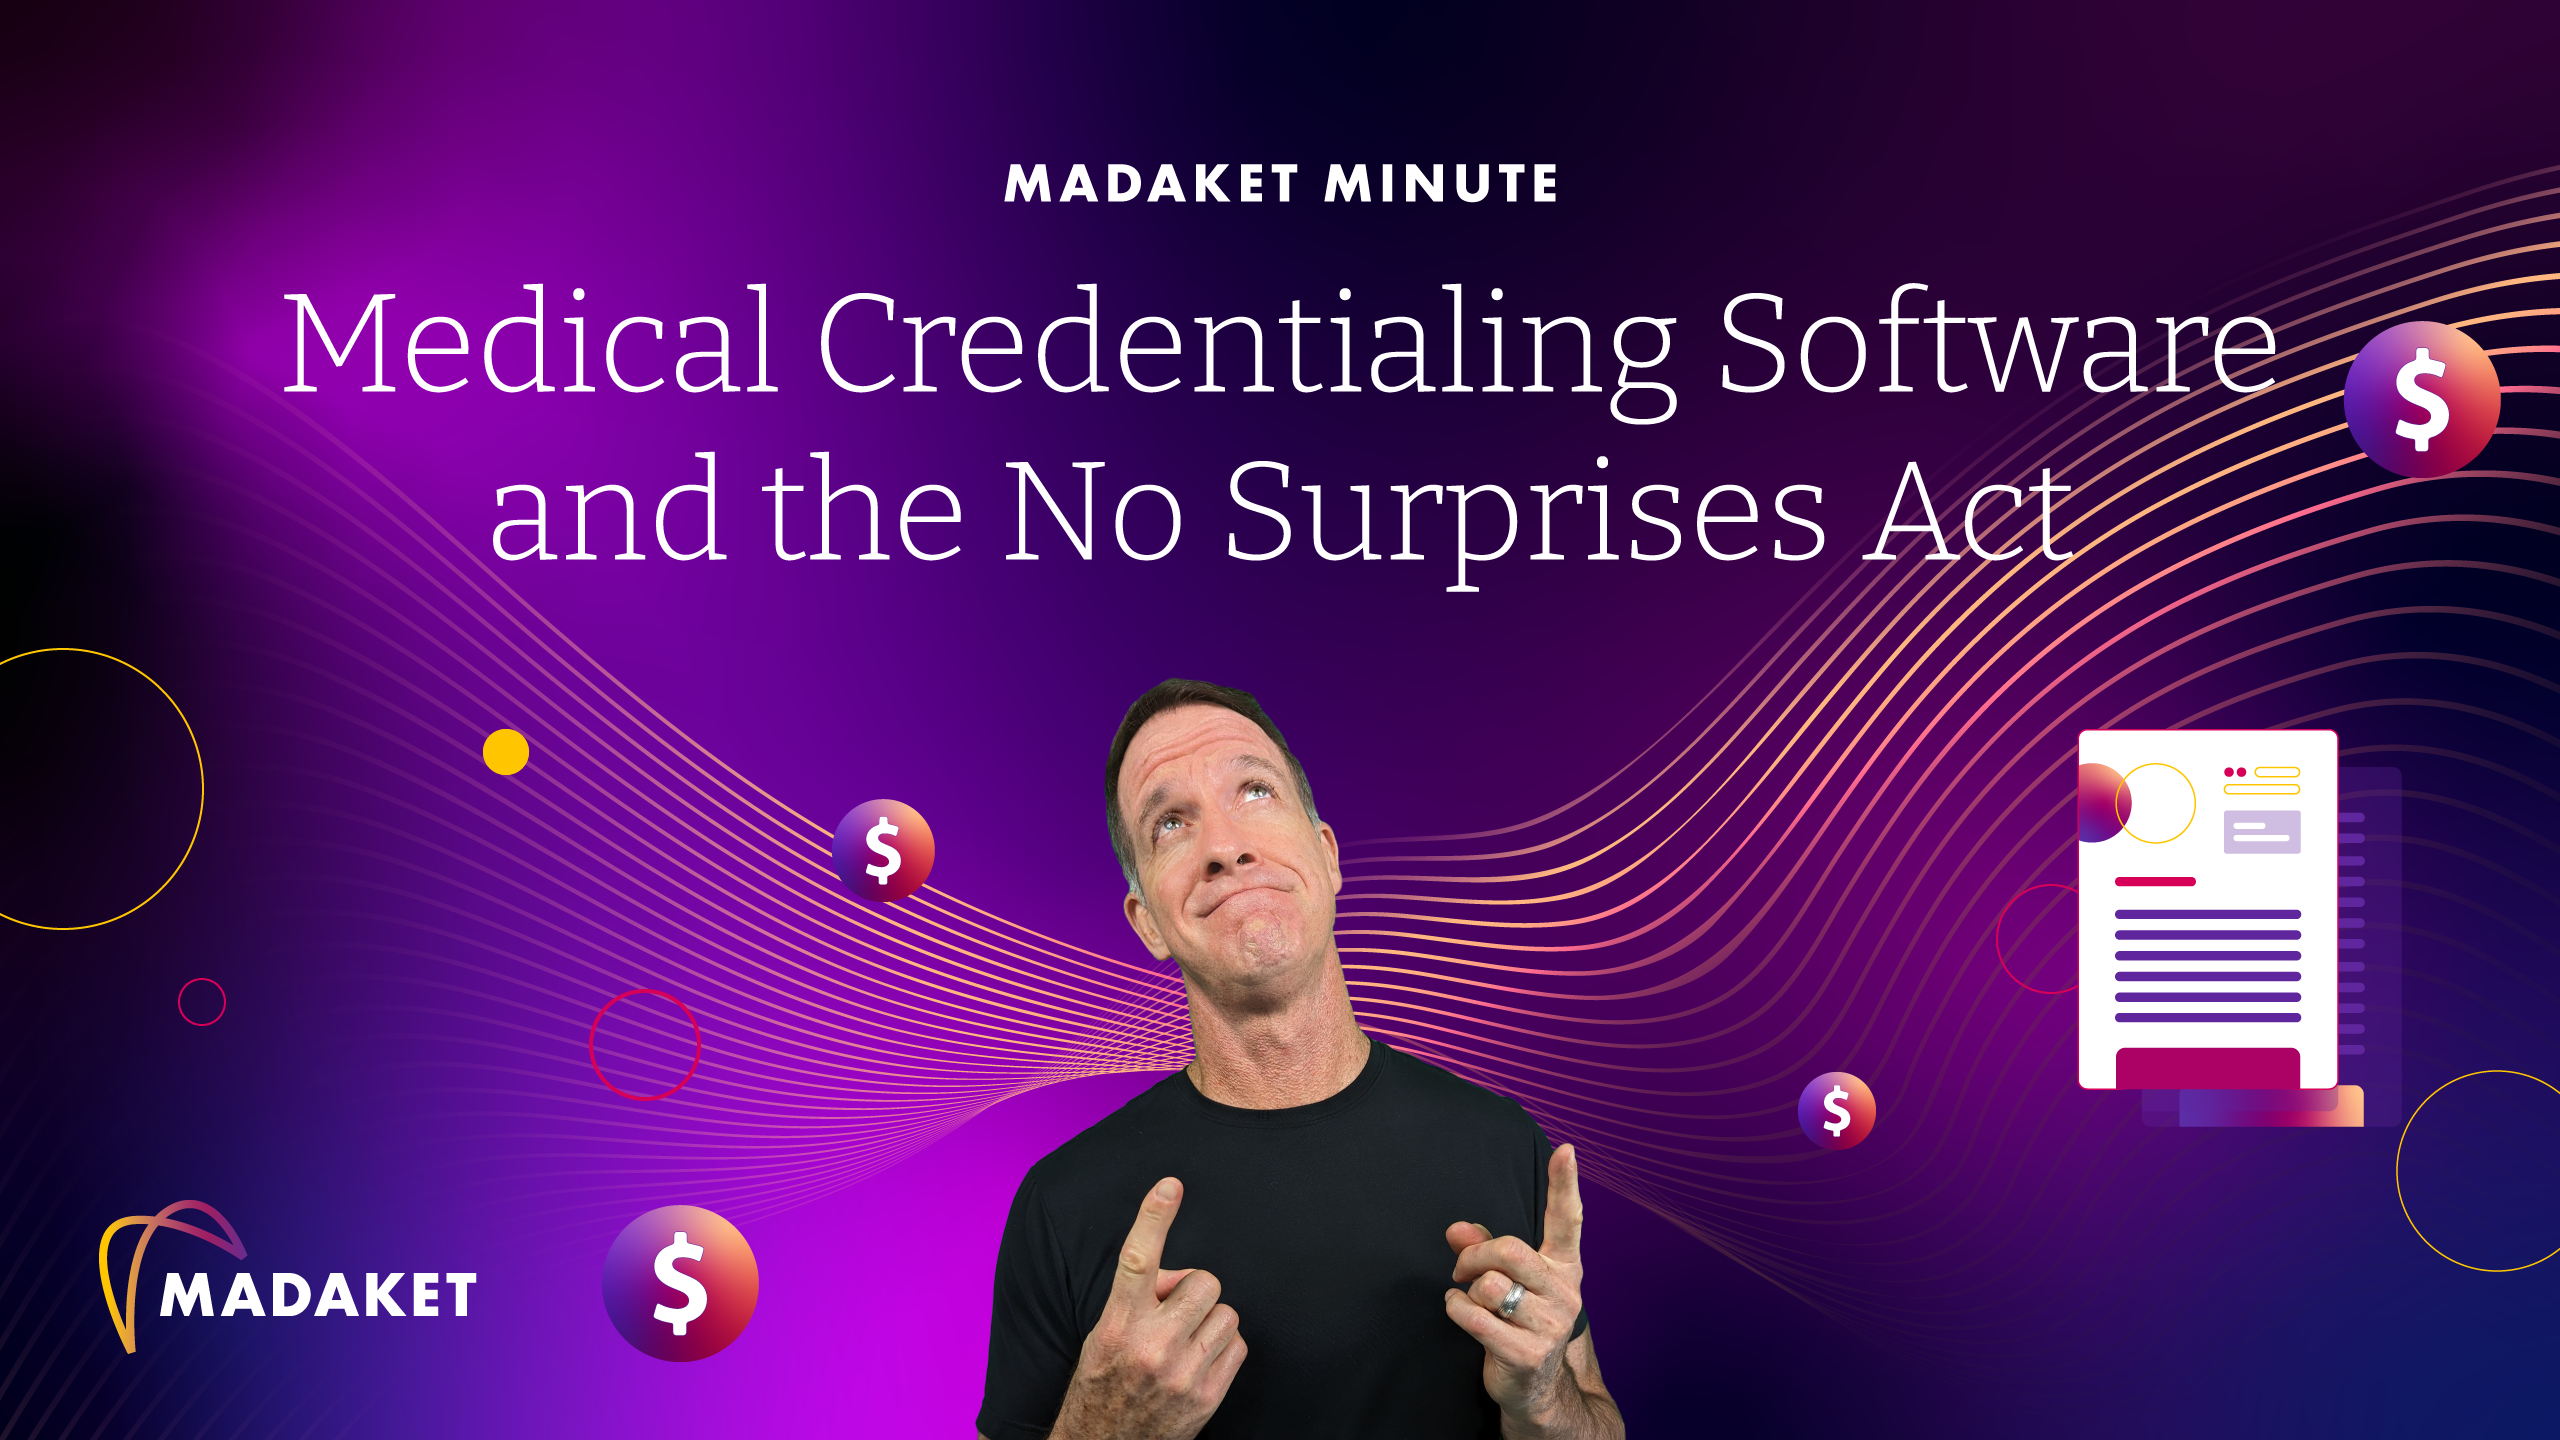 Madaket Minute Thumbnail for Medical Credentialing Software and the No Surprises Act